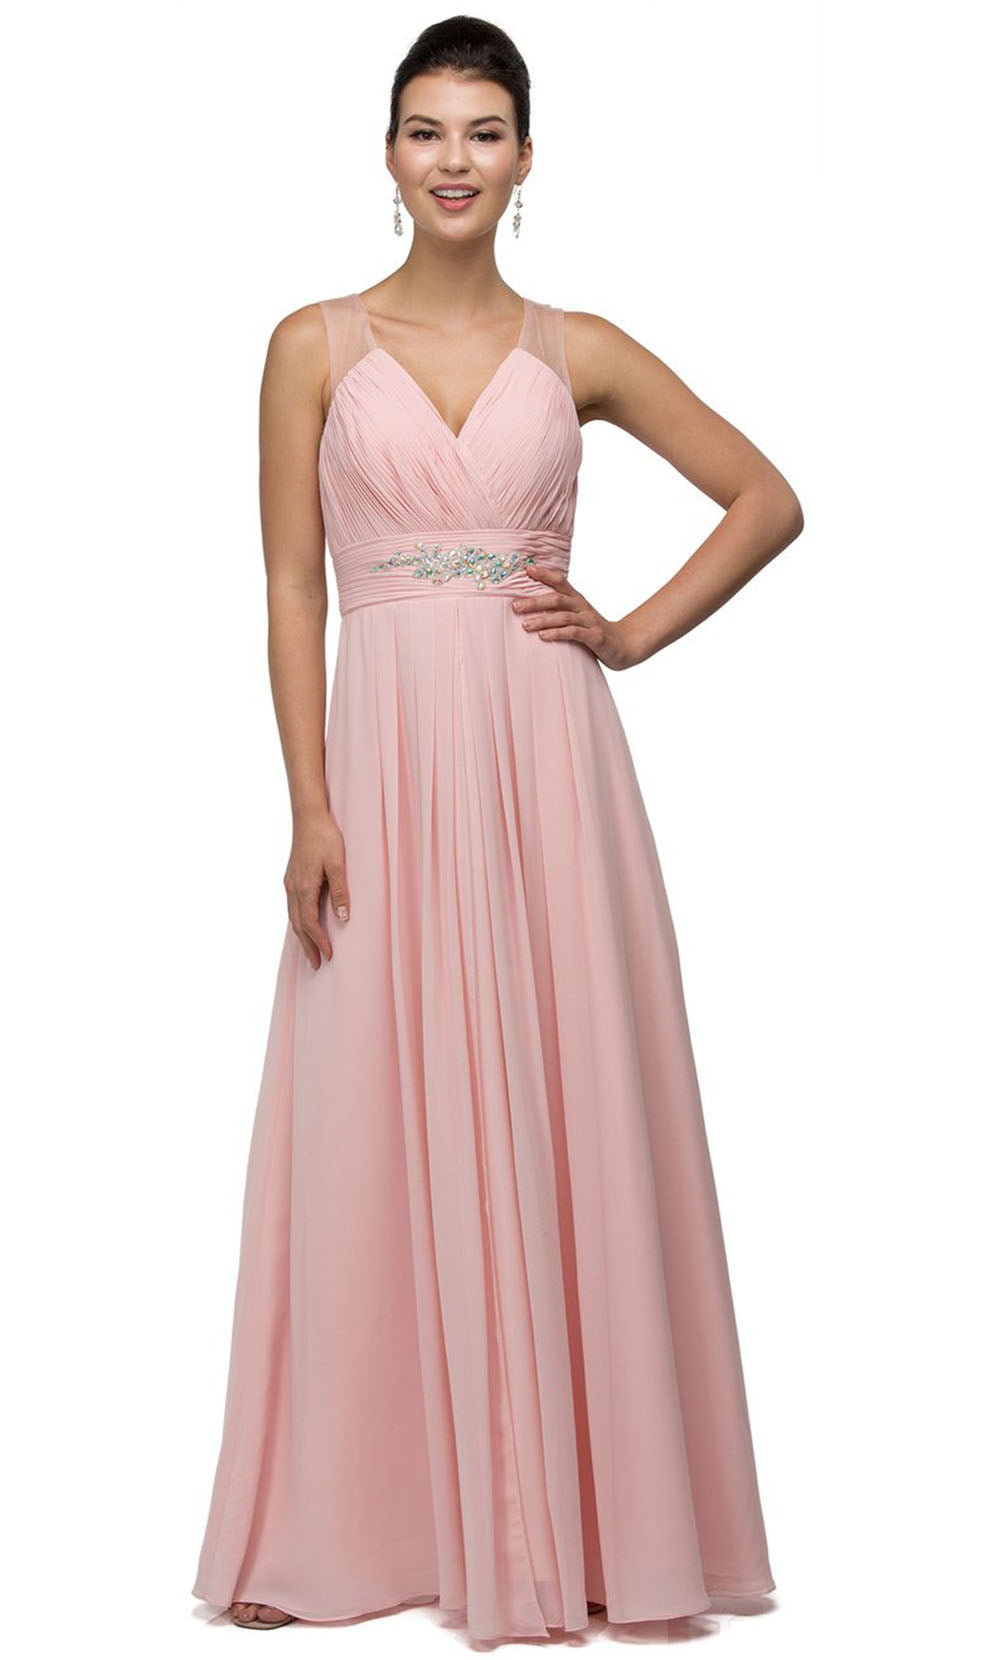 Dancing Queen - 9539 V-Neck Illusion Back Ruched A-Line Gown In Pink